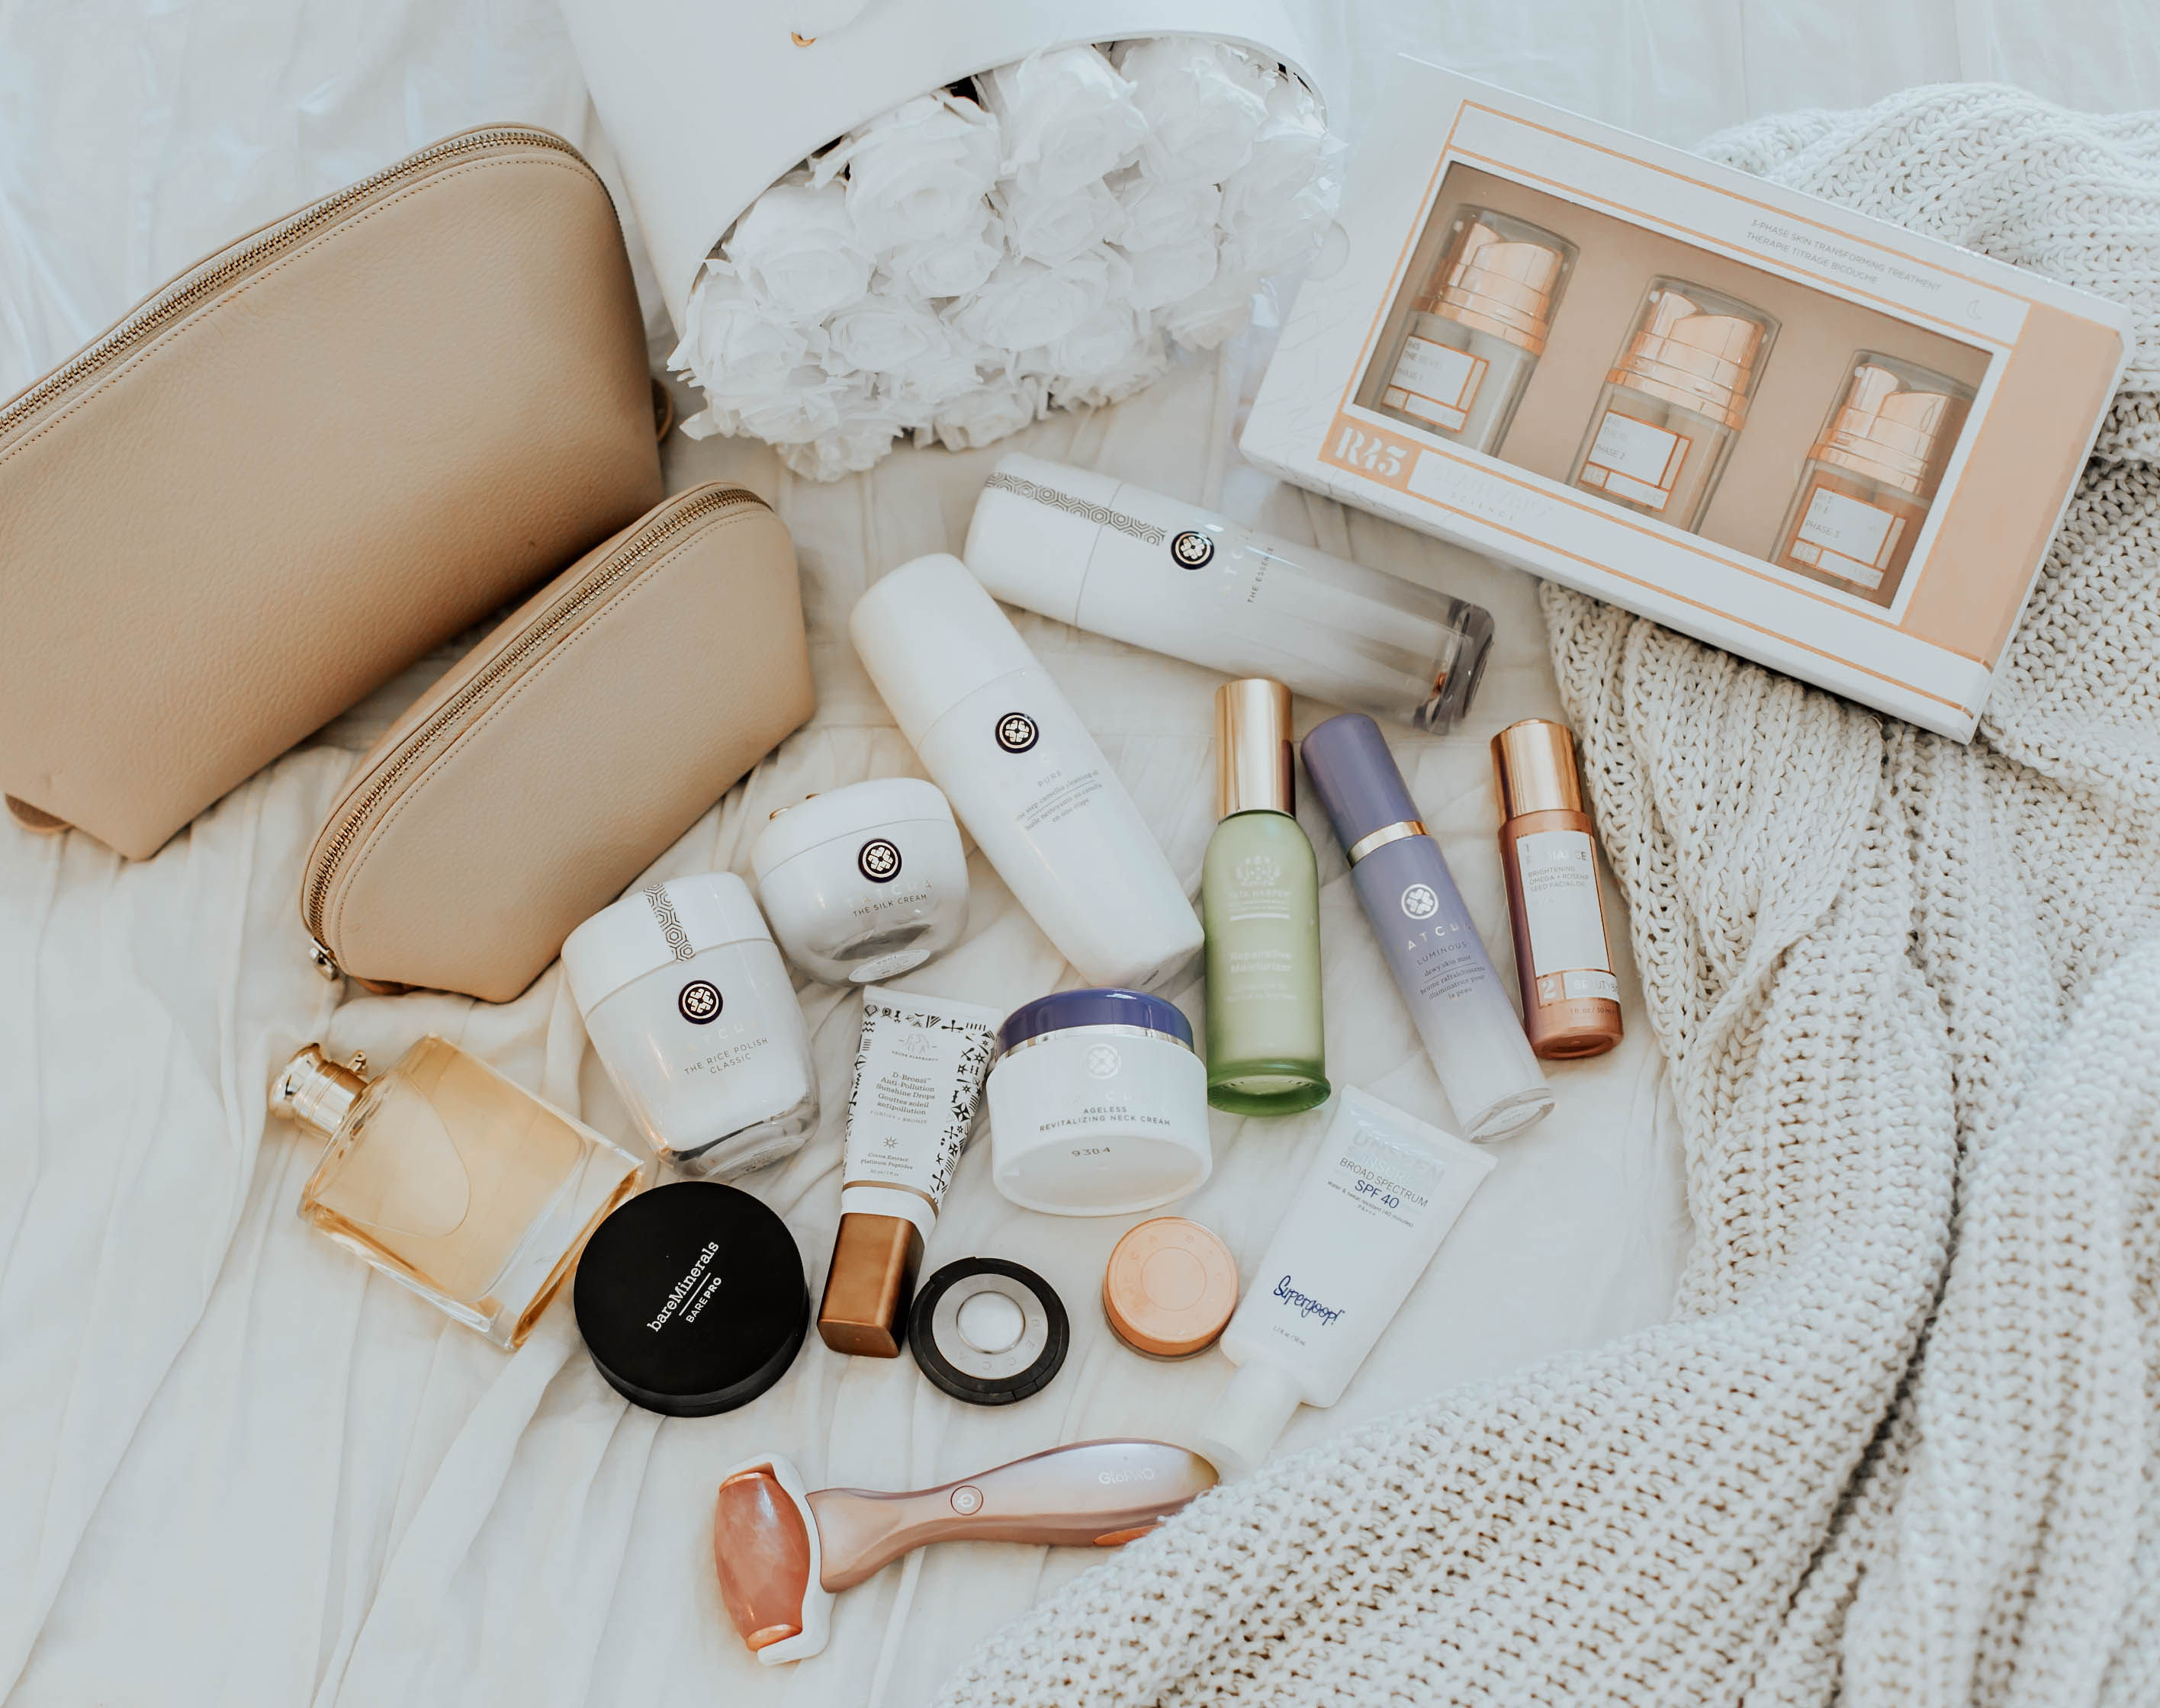 Fashion Blogger, Emily Farren Wieczorek of Two Peas in a Prada shares her Beauty and Skincare Routine - most of which is on sale for the HUGE Sephora event! 